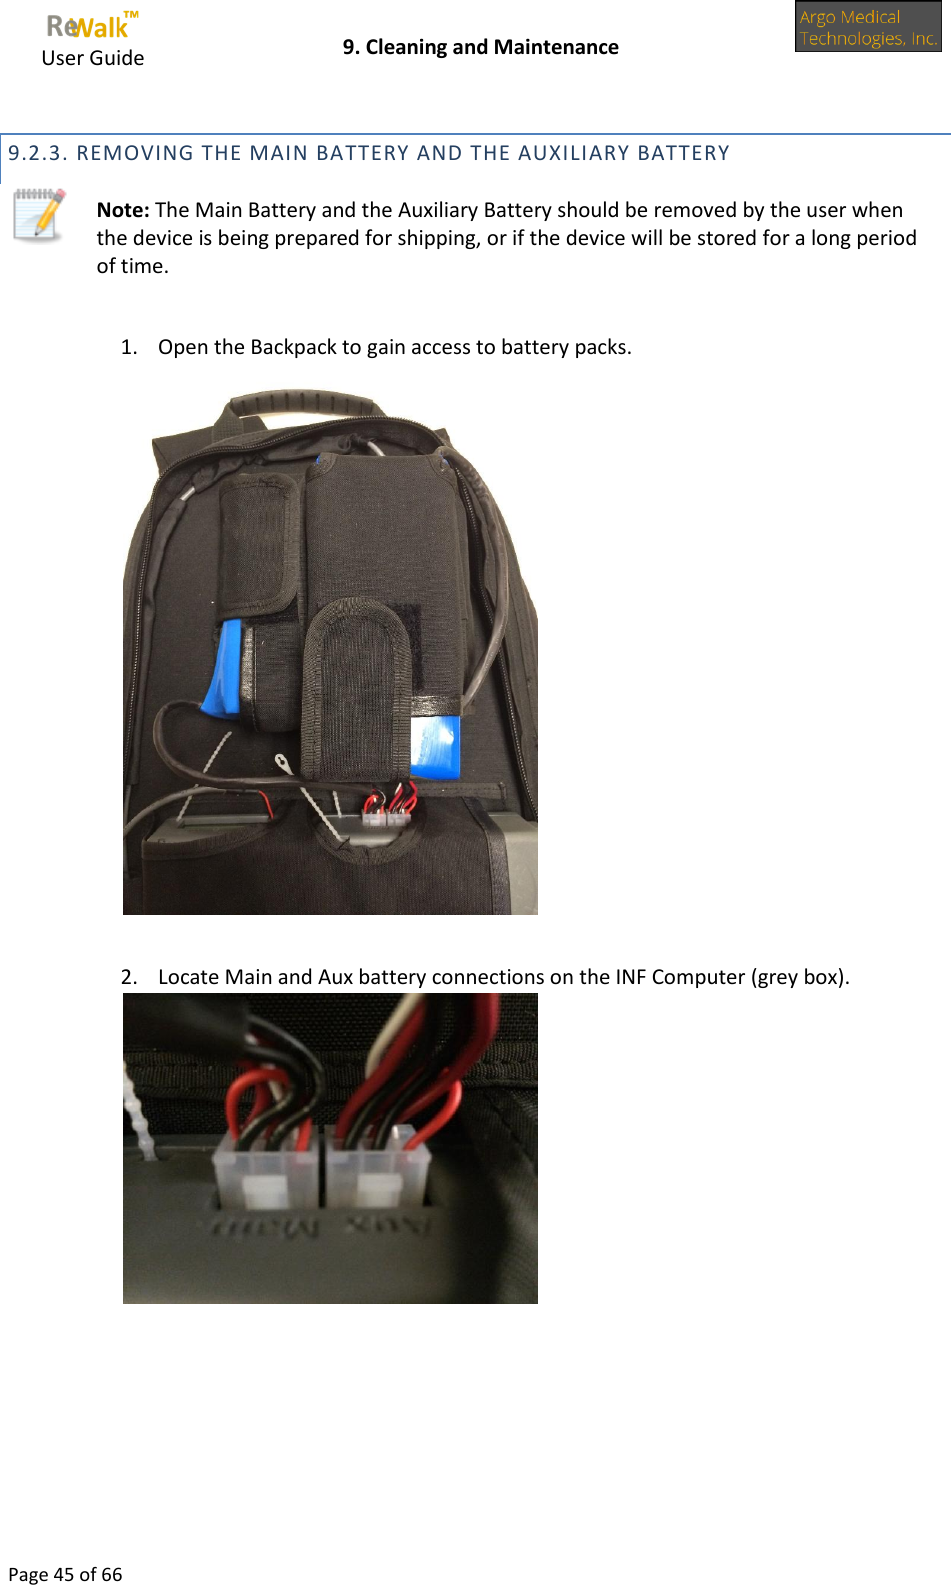     User Guide    9. Cleaning and Maintenance  Page 45 of 66  9.2.3. REMOVING THE MAIN BATTERY AND THE AUXILIARY BATTERY  Note: The Main Battery and the Auxiliary Battery should be removed by the user when the device is being prepared for shipping, or if the device will be stored for a long period of time.  1. Open the Backpack to gain access to battery packs.   2. Locate Main and Aux battery connections on the INF Computer (grey box).      